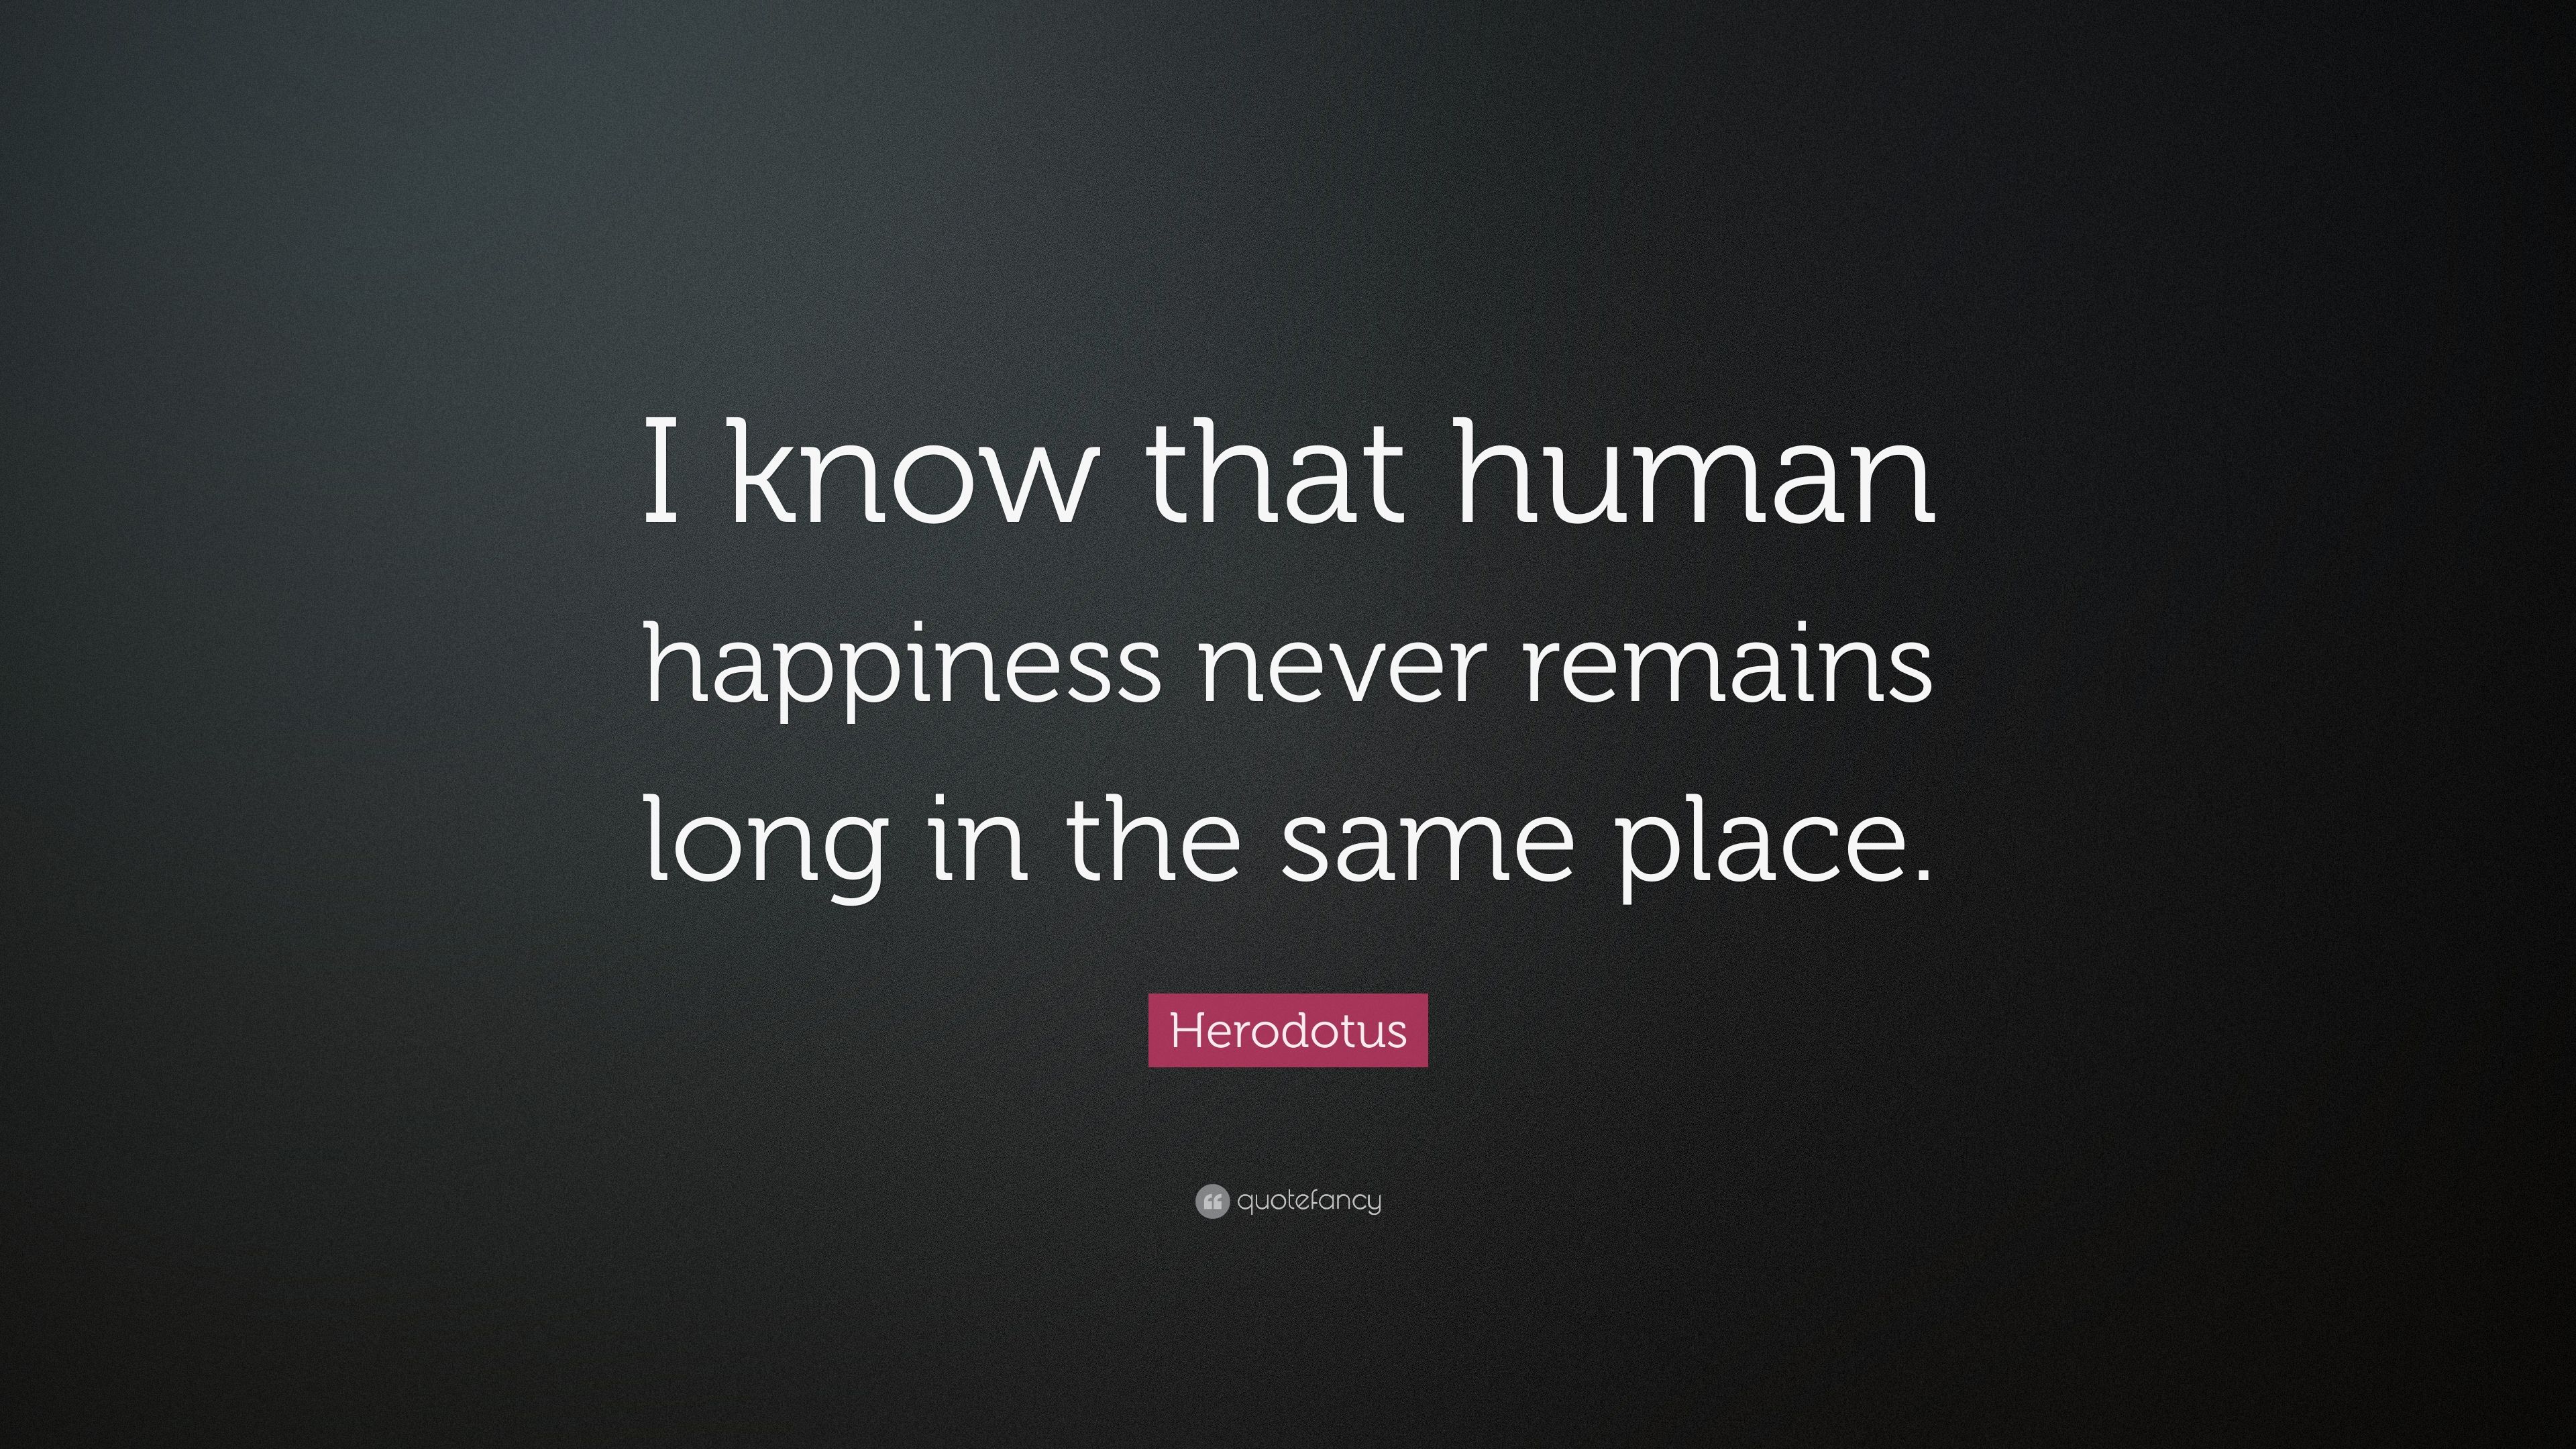 Herodotus Quote: “I know that human happiness never remains